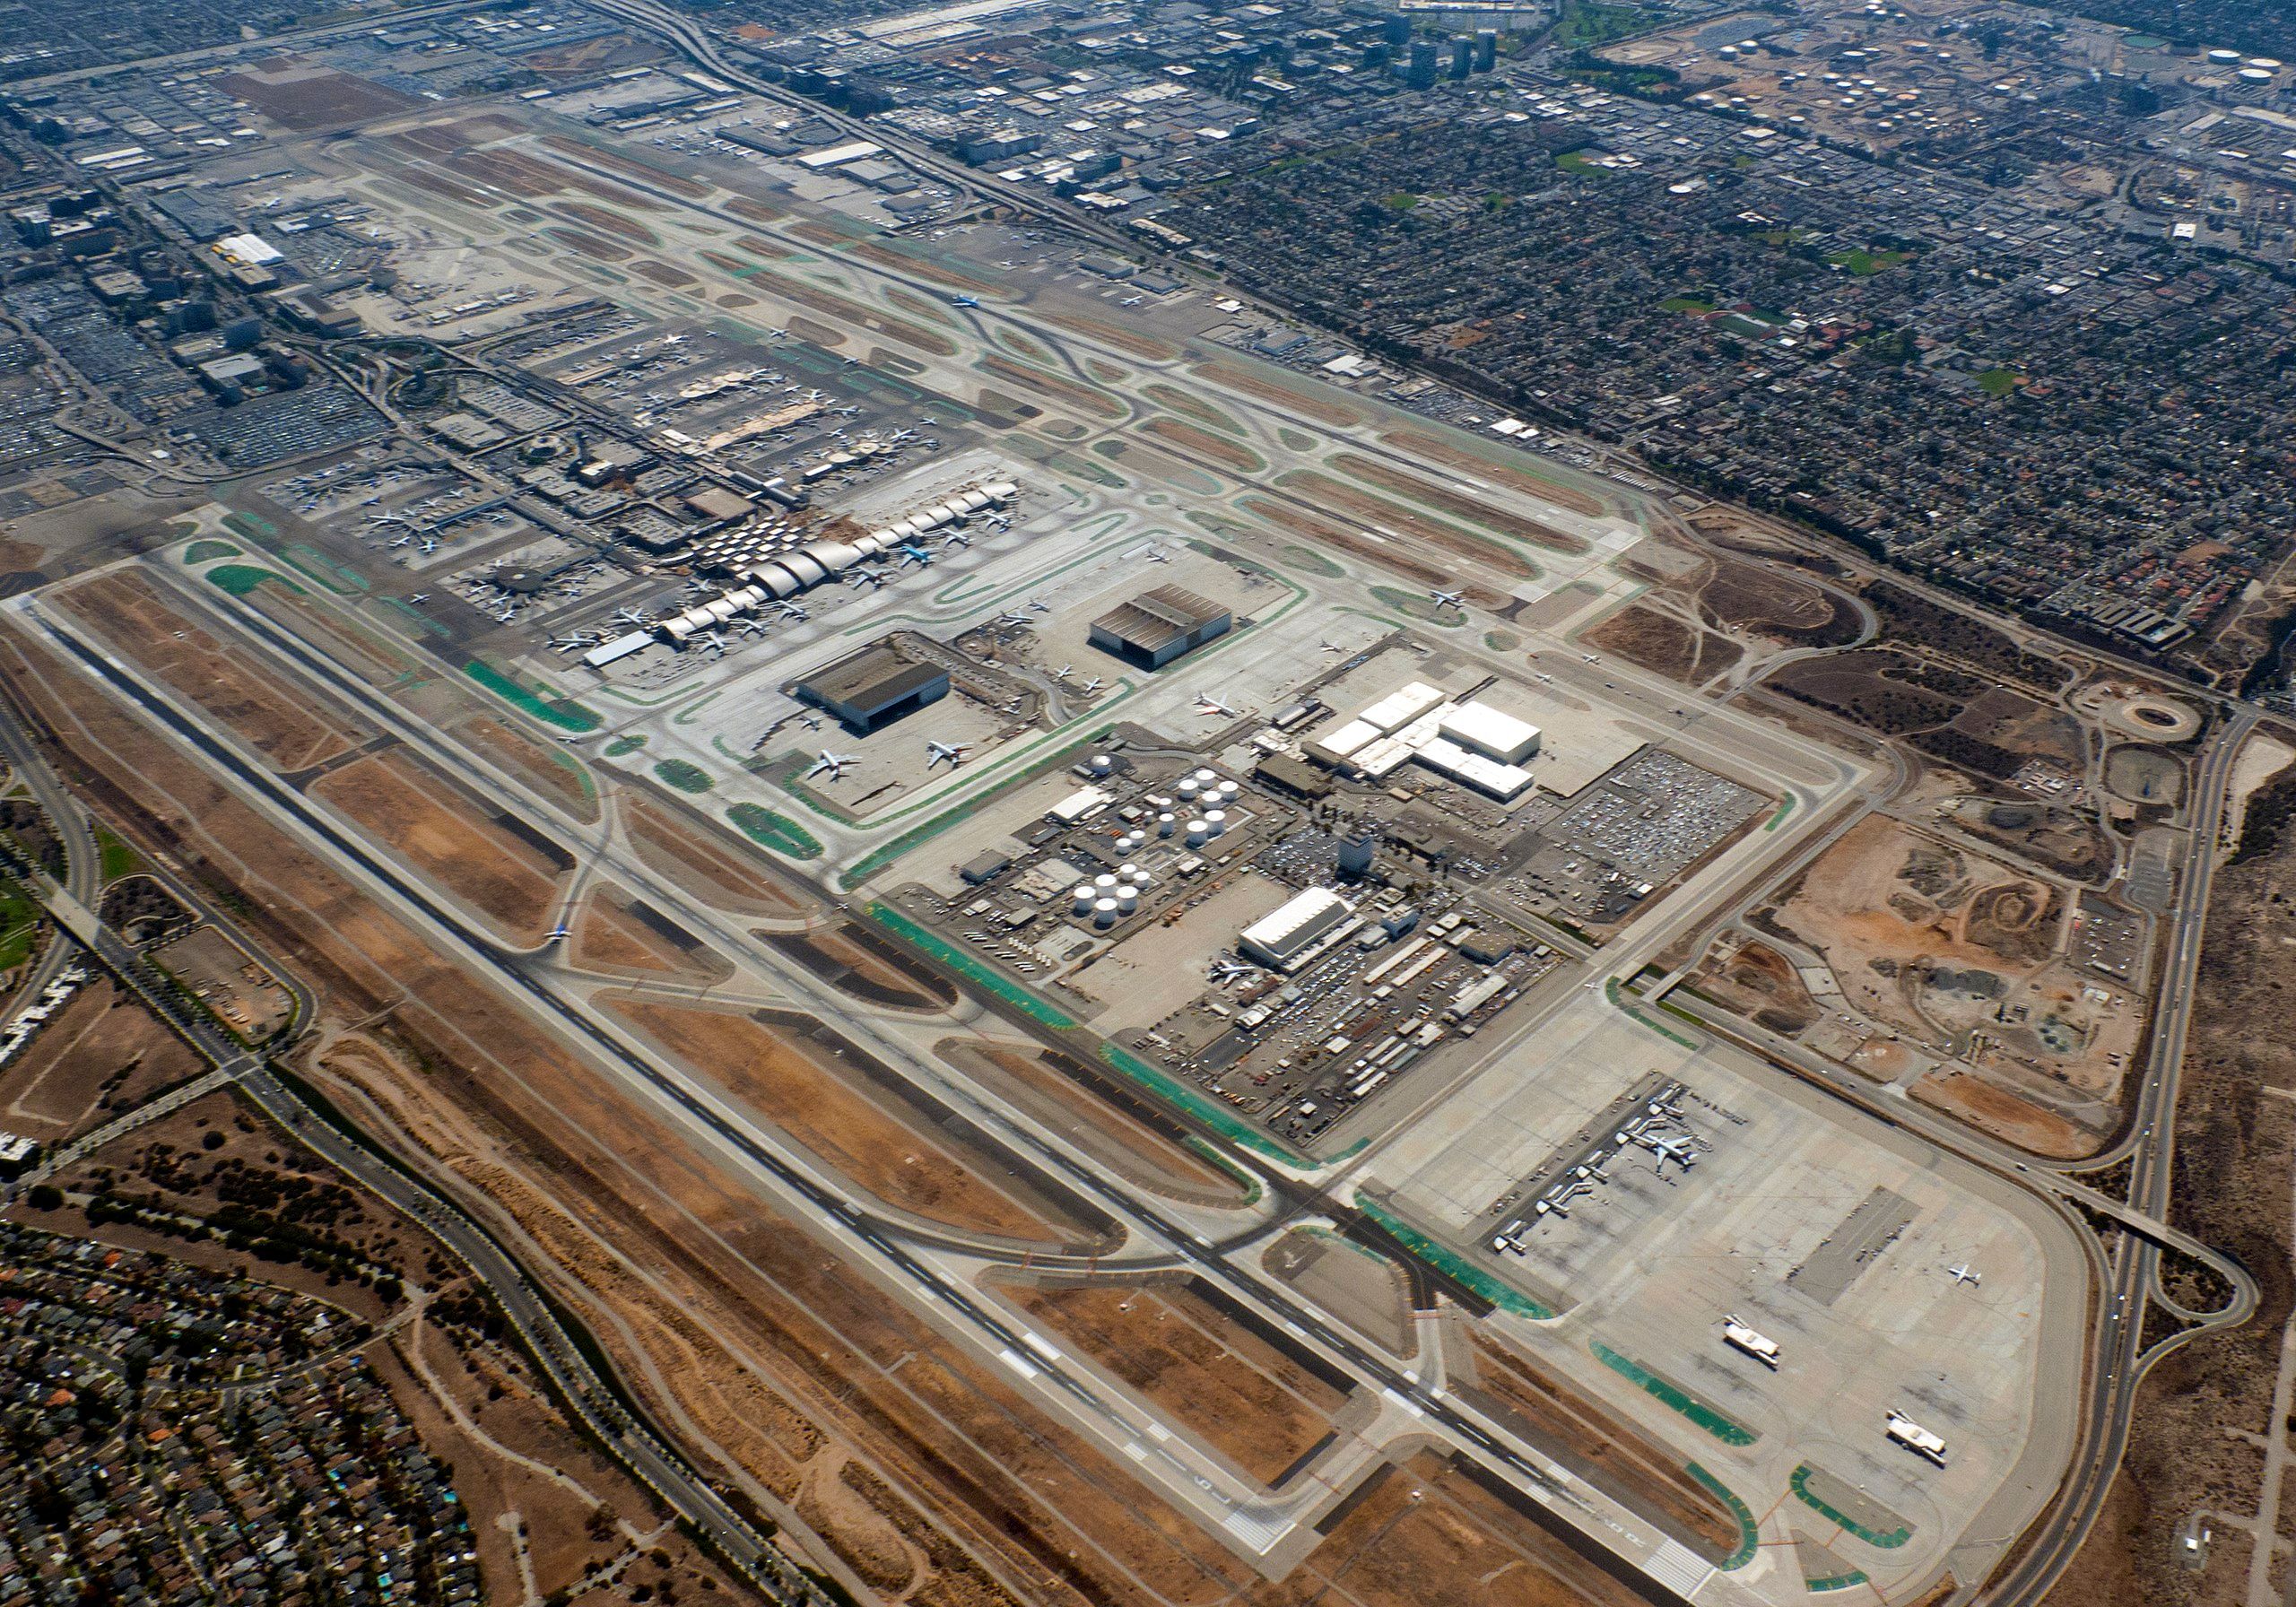 An Aerial View of Los Angeles International Airport.